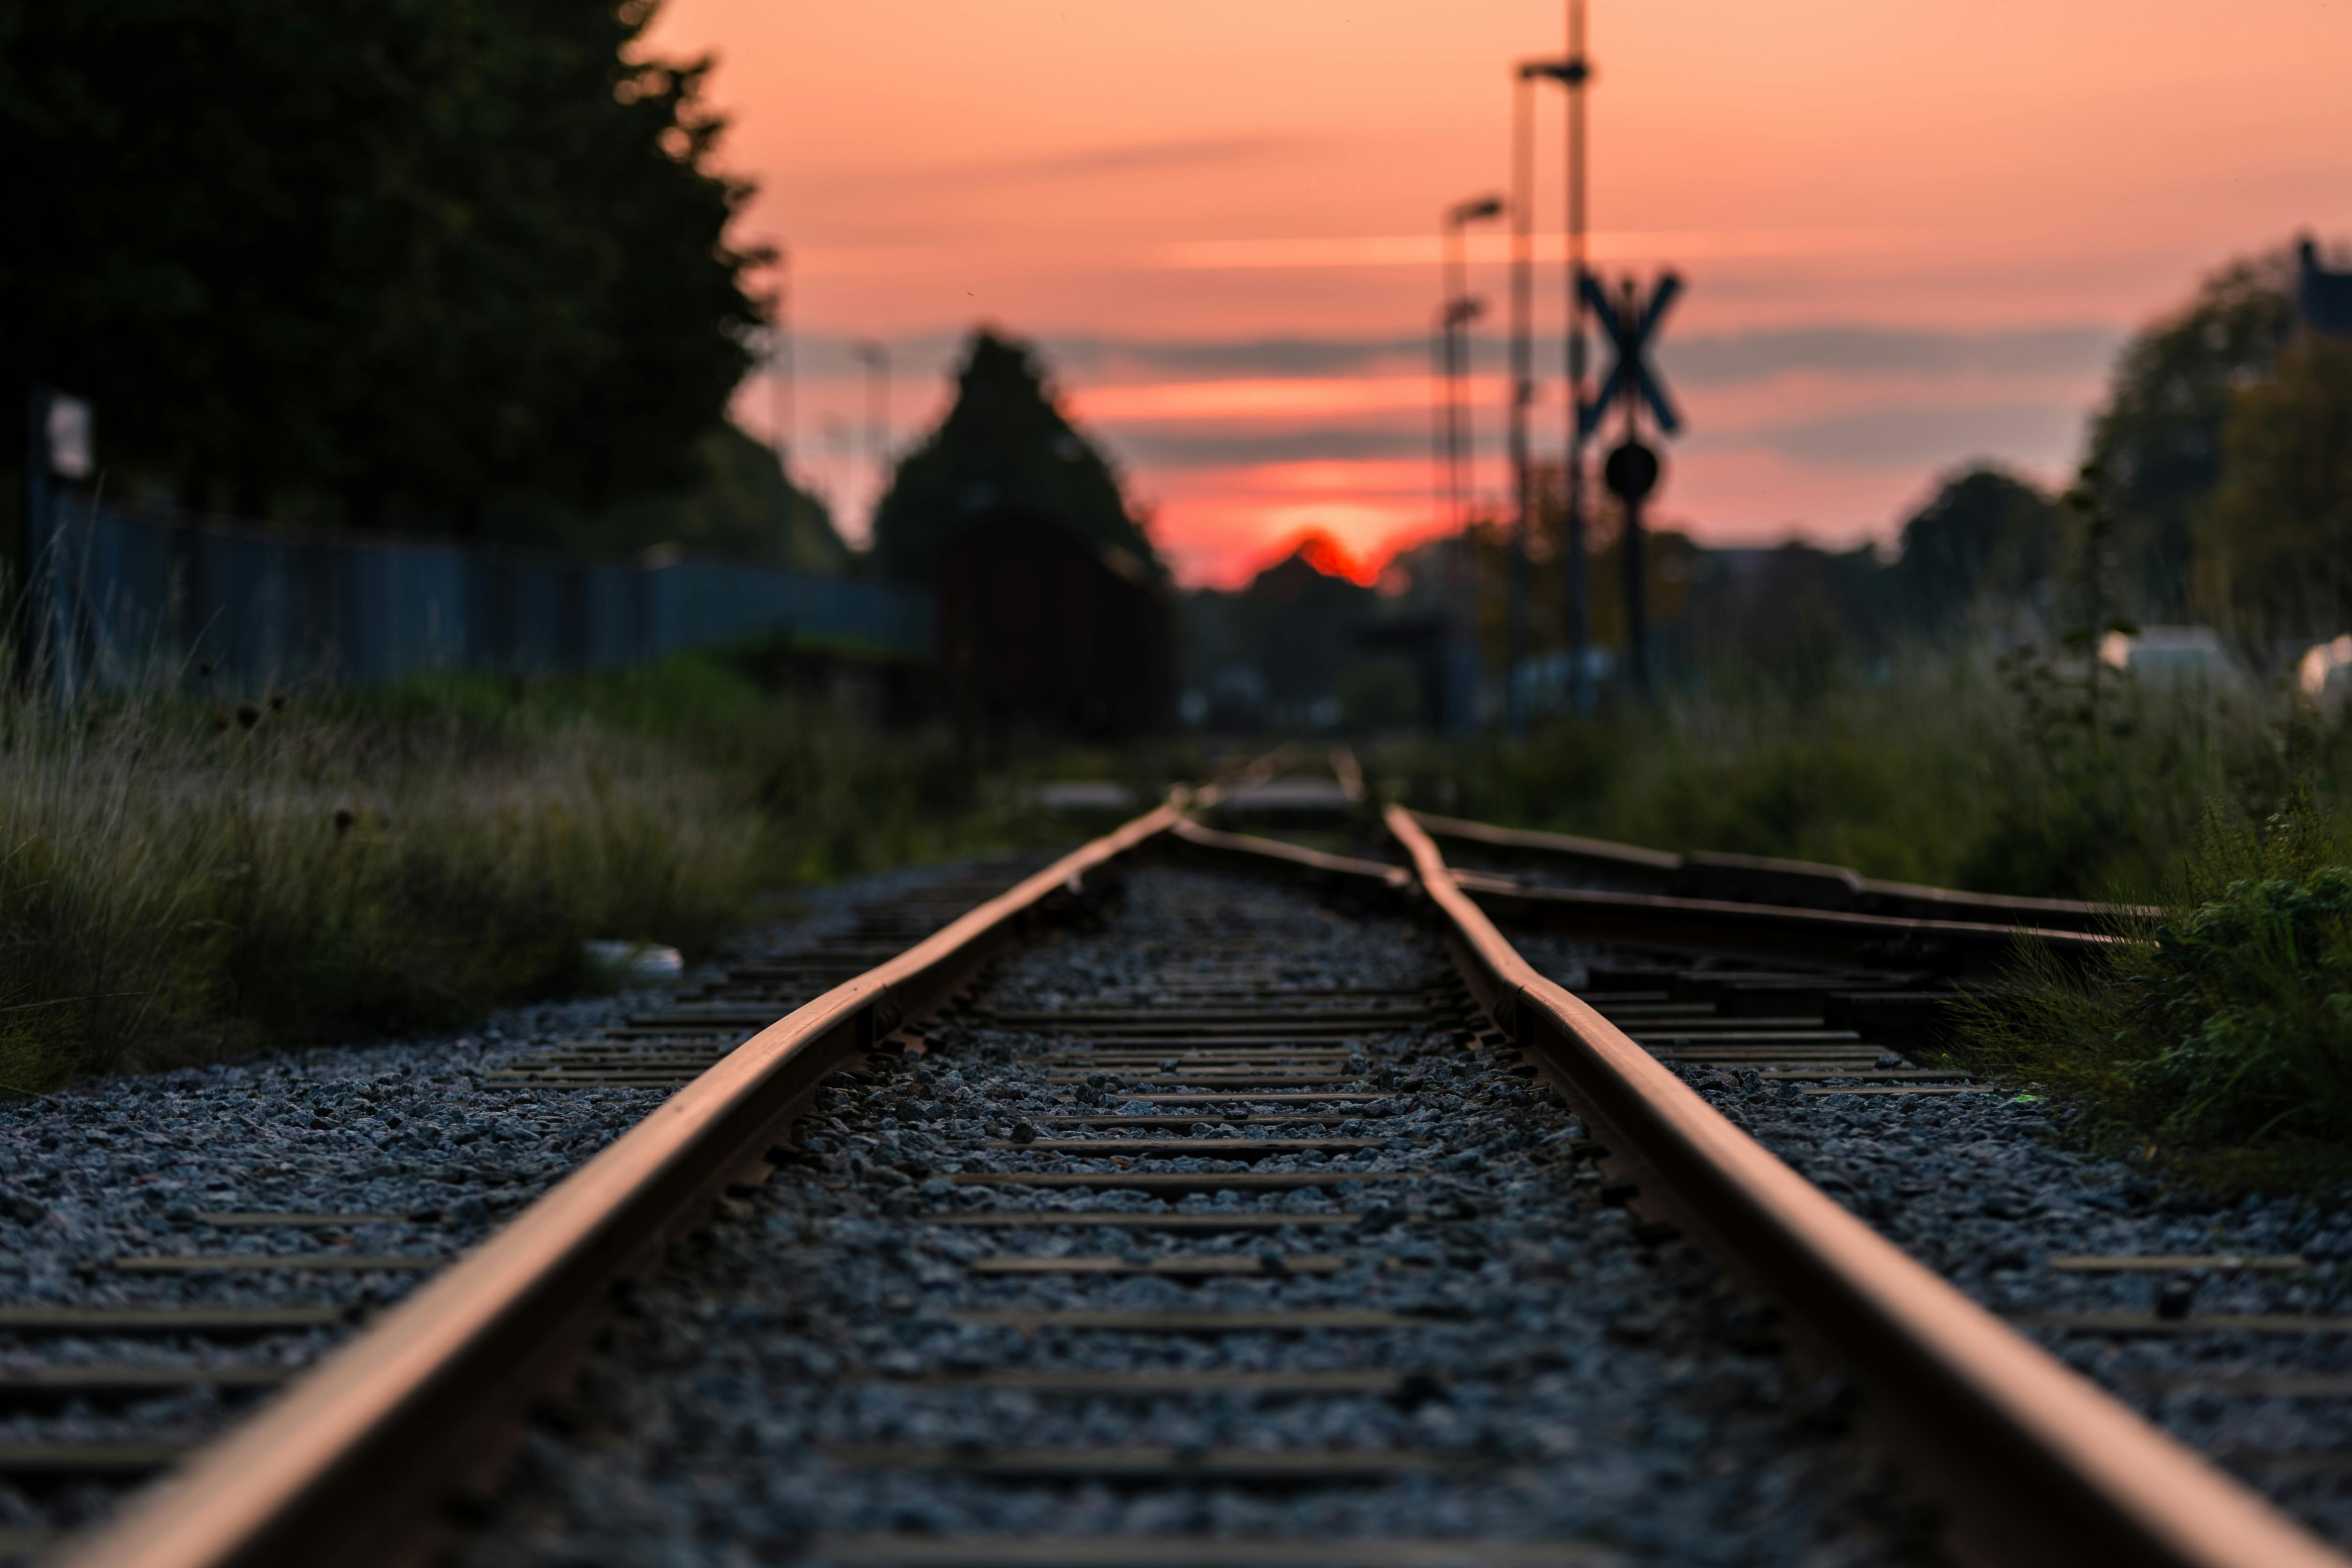 Railway - HDR Free Photo Download | FreeImages